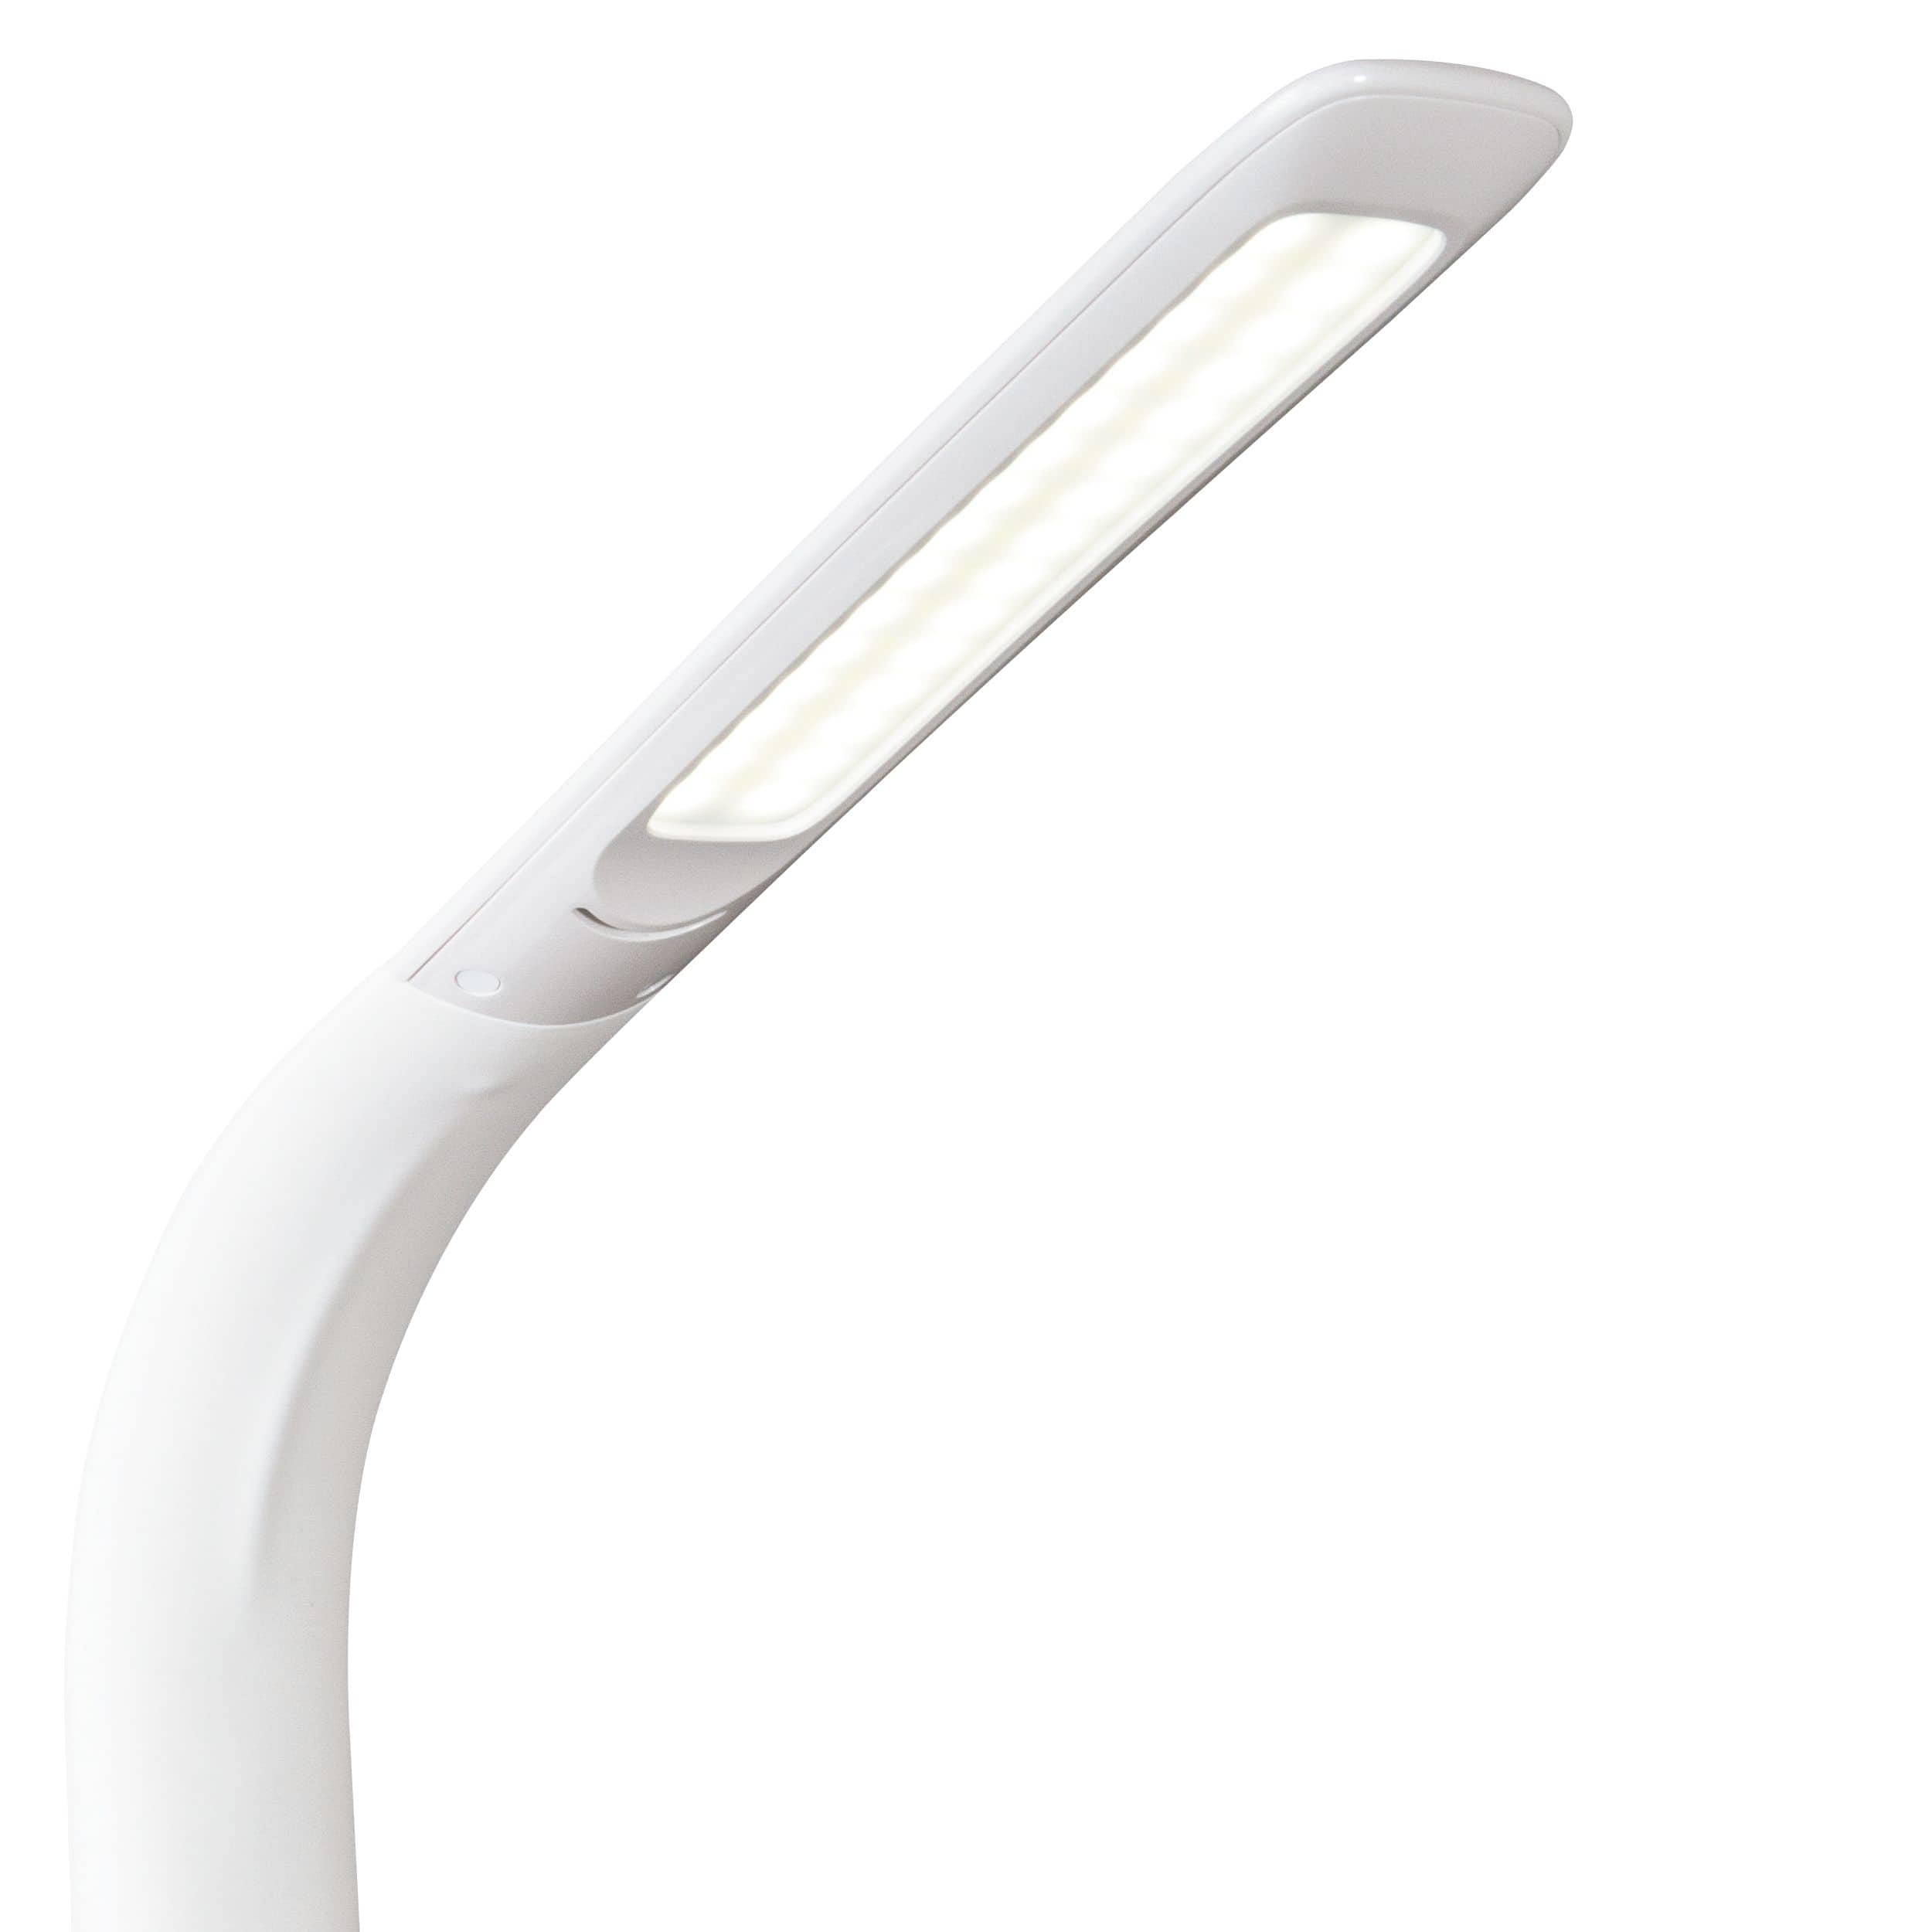 OttLite Purify LED Sanitizing Desk Lamp with Wireless Charging – Eliminates  up to 99.9% of Bacteria, Touch Activated, Flexible Neck, Modern Light for  Reading, Crafting & Office Desktop 